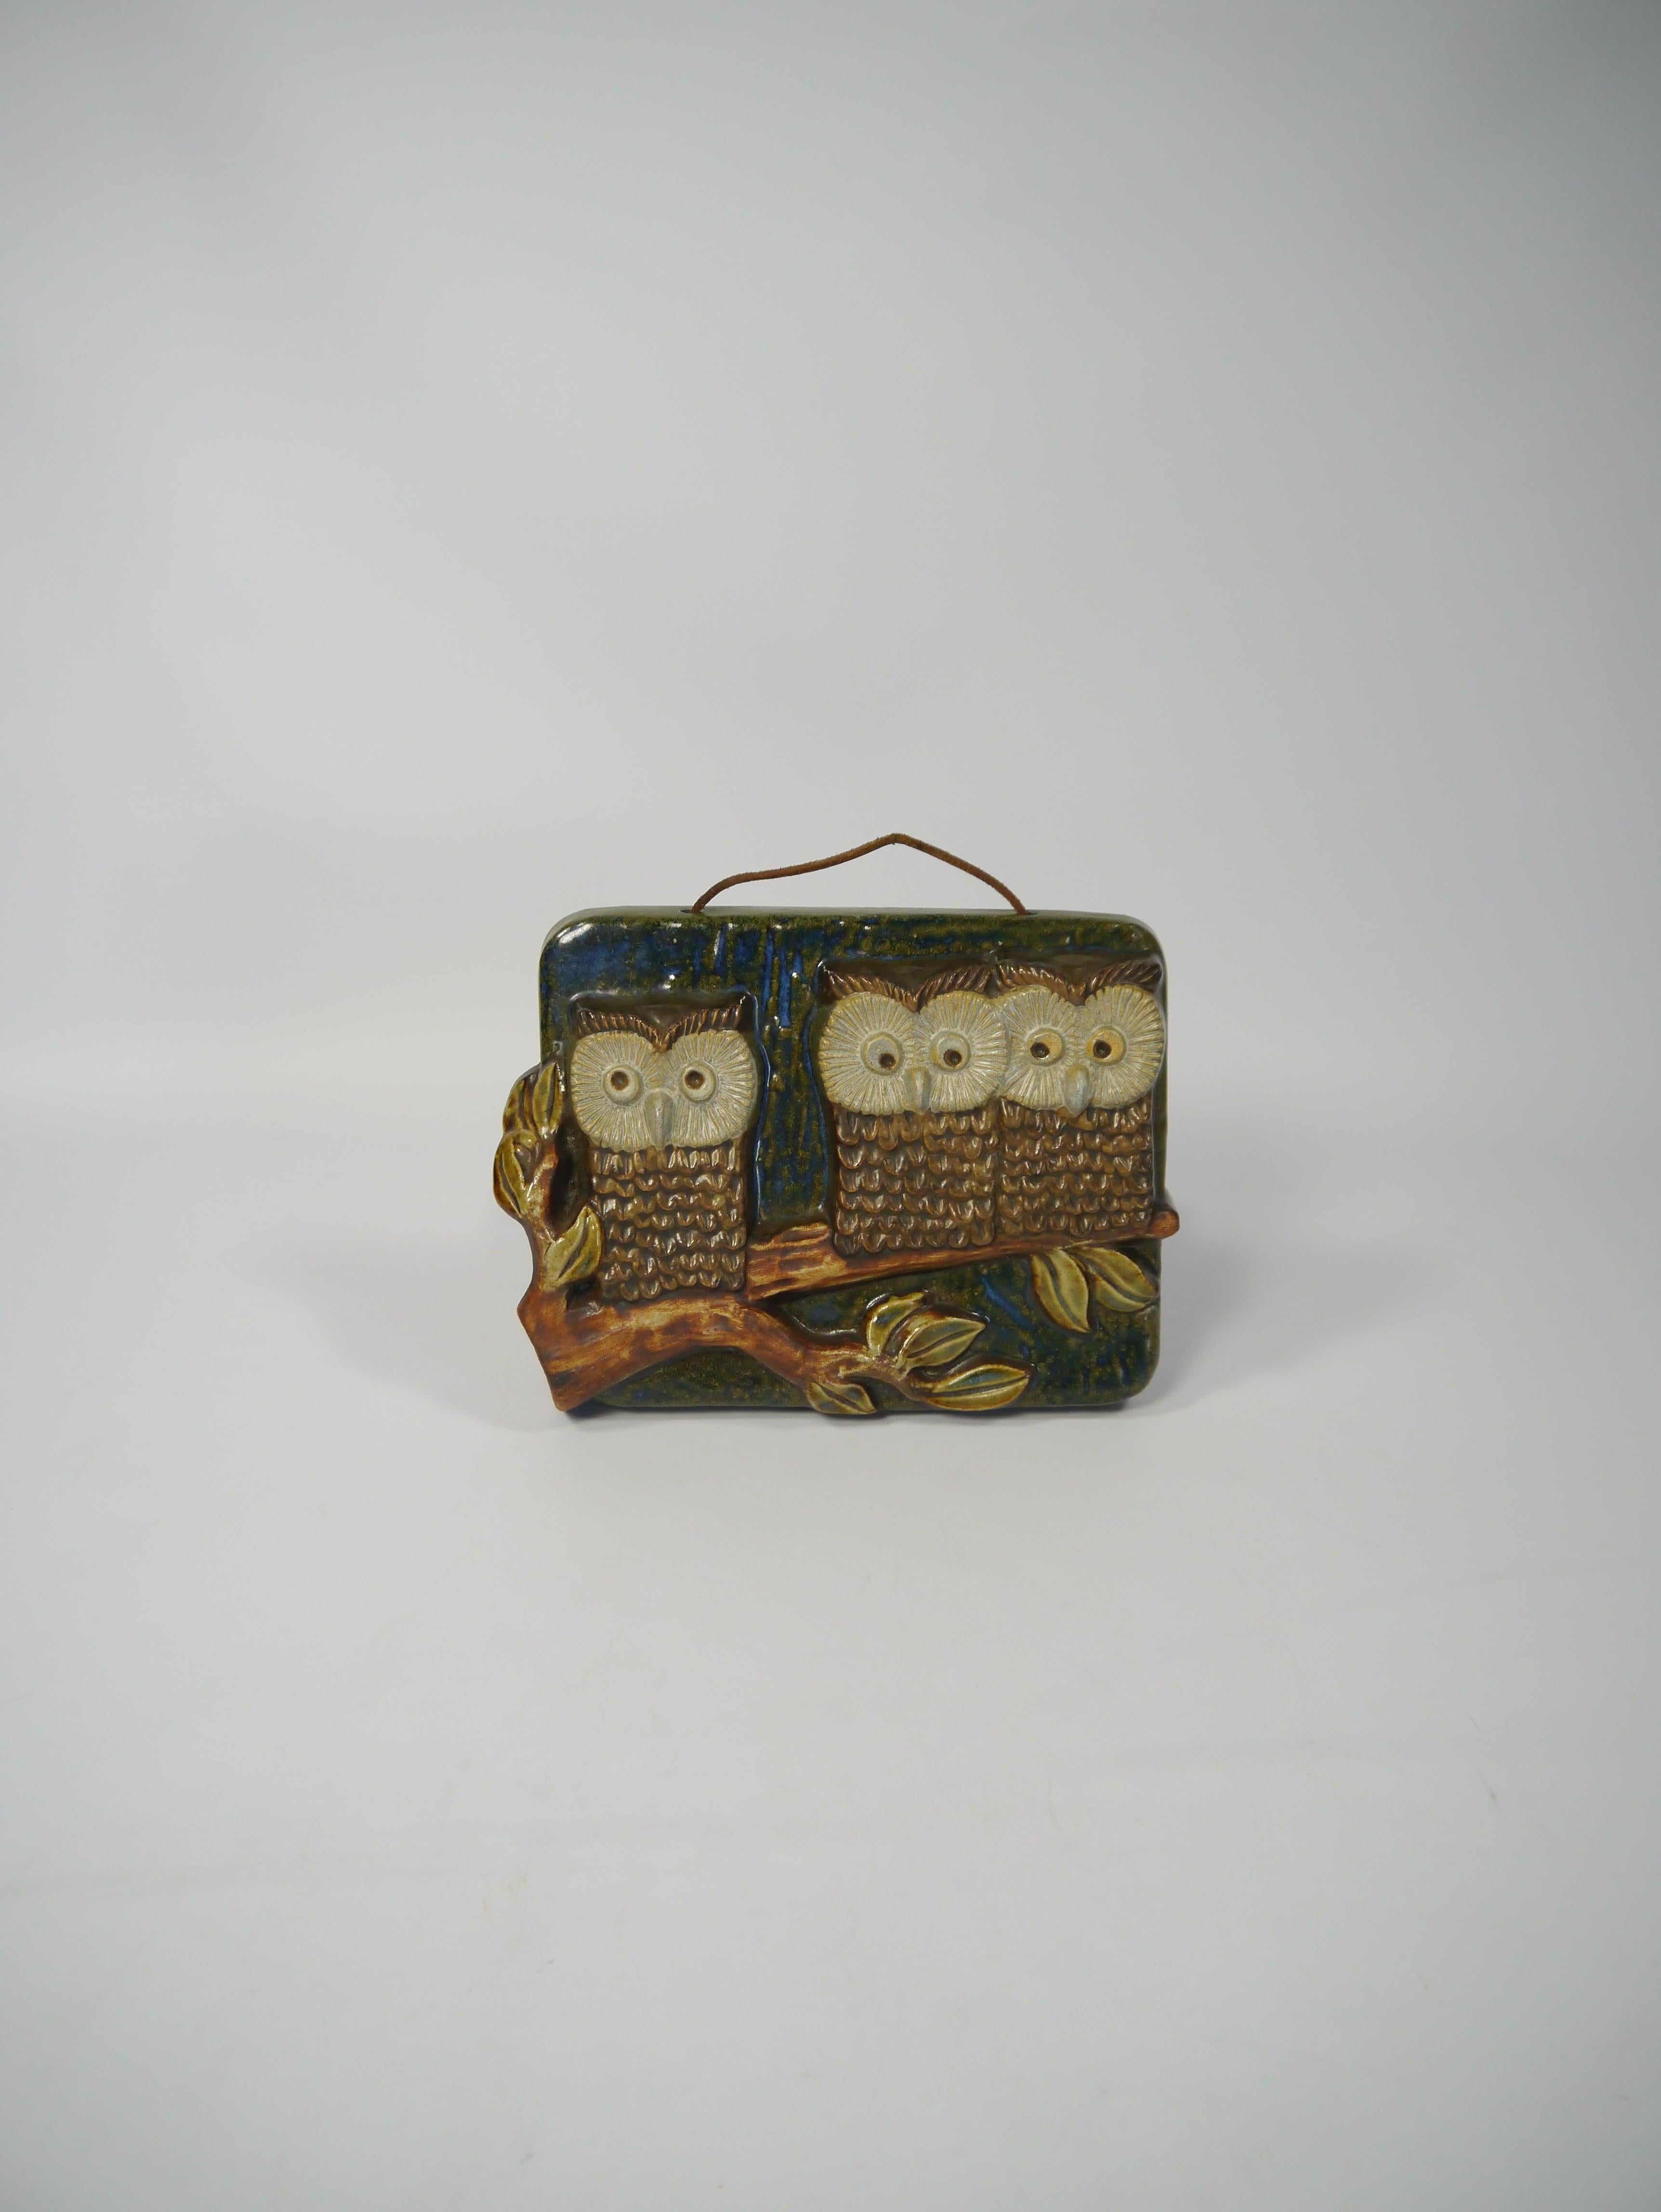 Charming glazed ceramic wall plaque depicting three owls sitting on a branch. Fabricated by EGO Stengods, Sweden, 1960s.